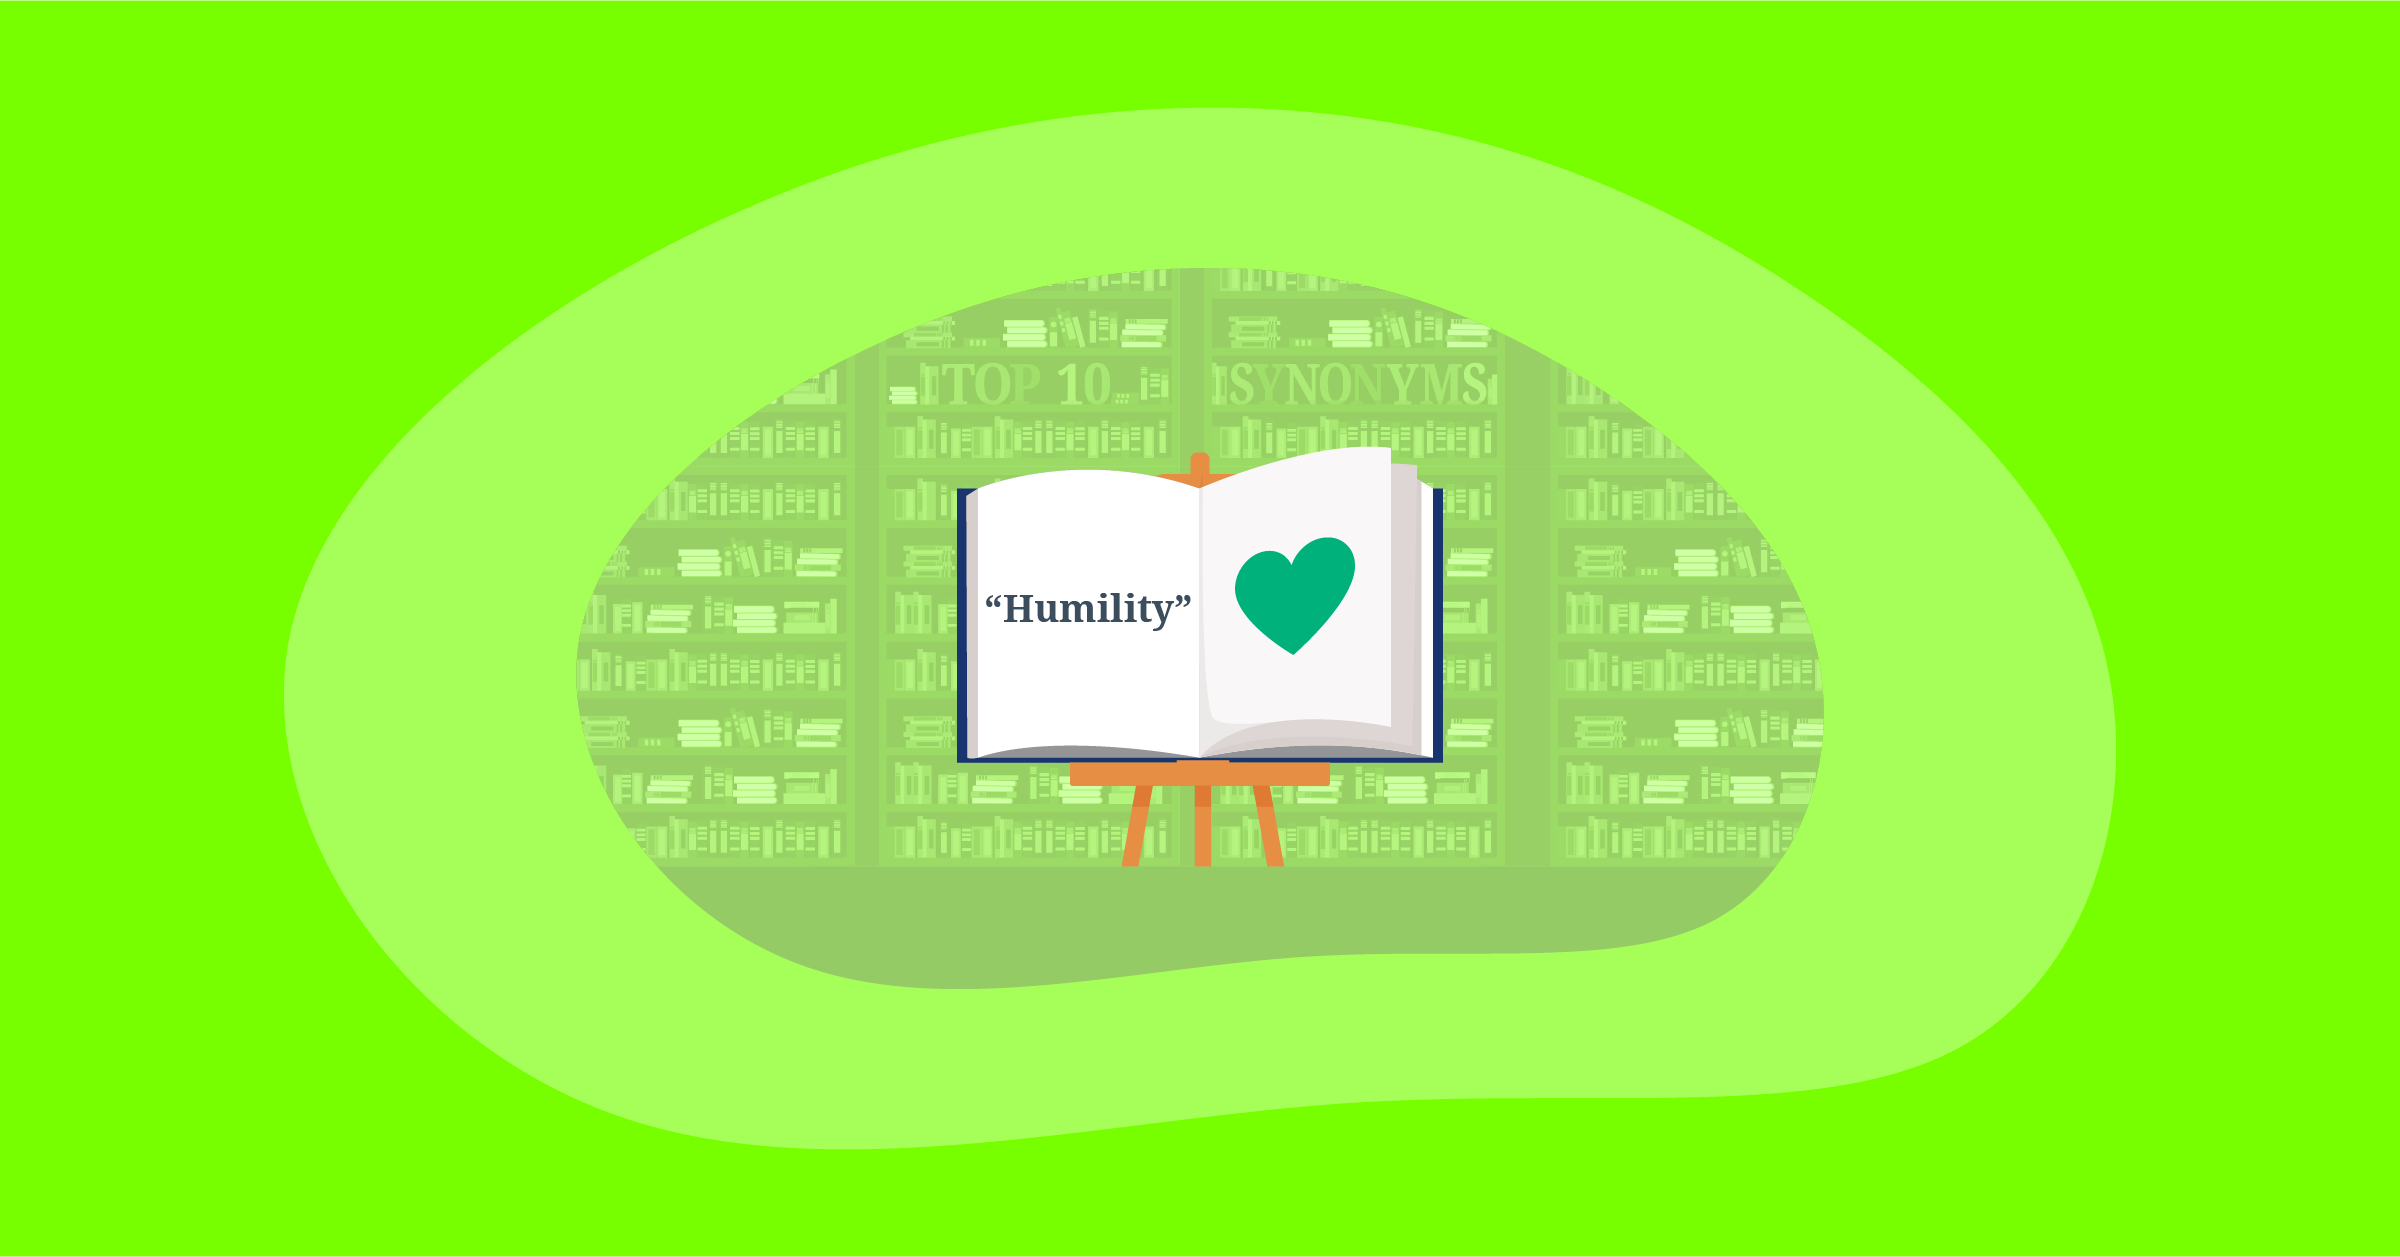 Illustration for top 10 positive impactful words for "Humility"